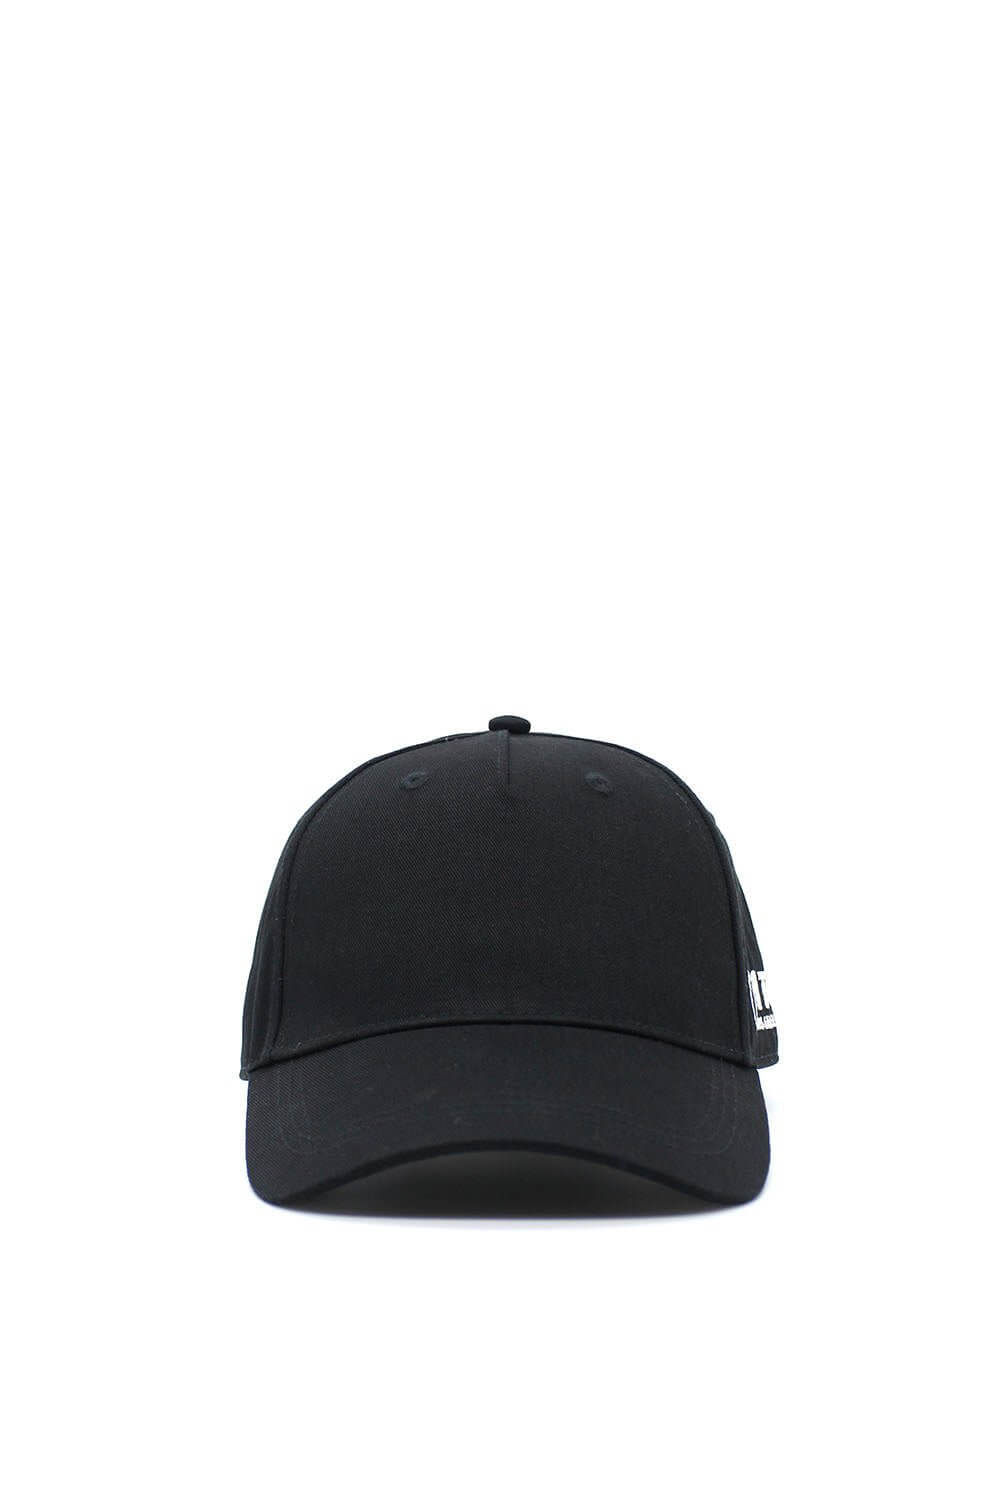 HTC SIDE CAP Black baseball cap , round crown with eyelets , htc logo embroidered on the side, adjustable strap on the back. One size fits all. 100% cotton. HTC LOS ANGELES